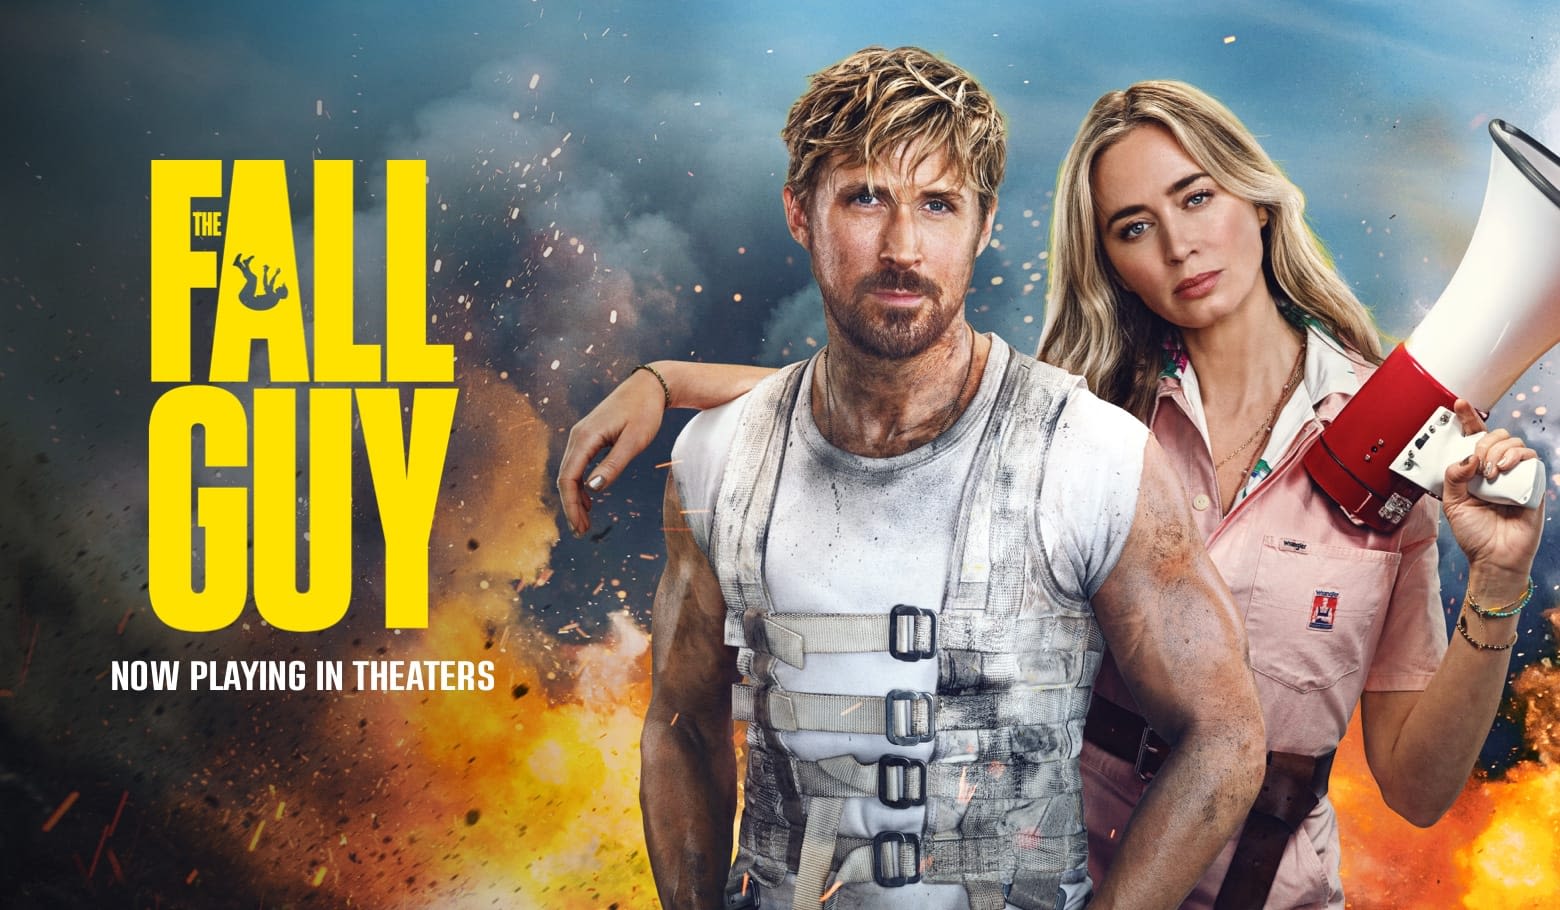 Box Office: "The Fall Guy" Not Connecting with Audiences, Sees $25 Mil Opening Weekend Despite Top Reviews, Solid Word of Mouth...